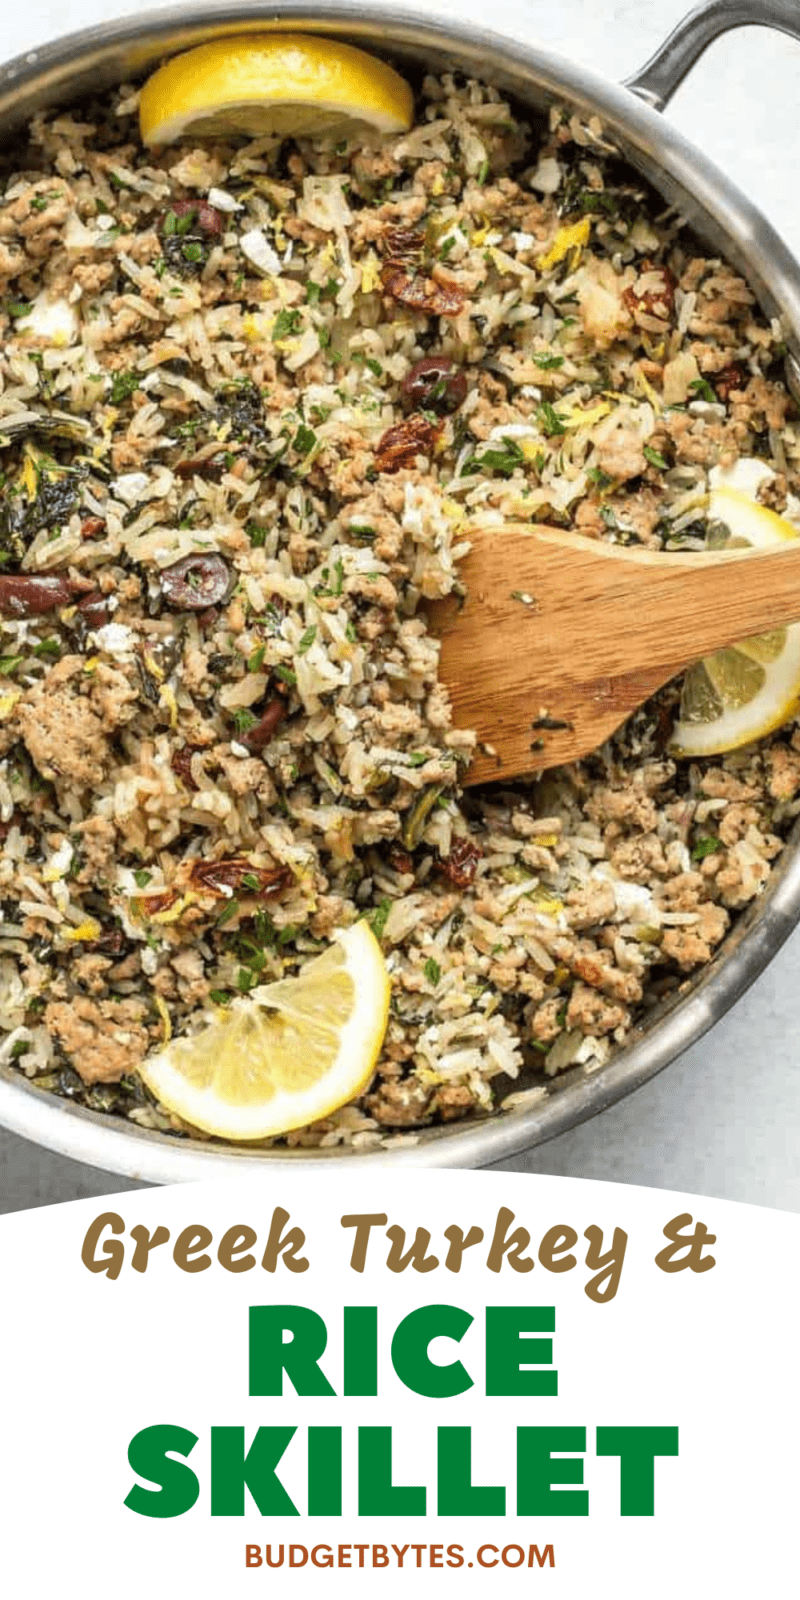 https://www.budgetbytes.com/wp-content/uploads/2017/06/Greek-Turkey-and-Rice-Skillet-2-800x1600.png